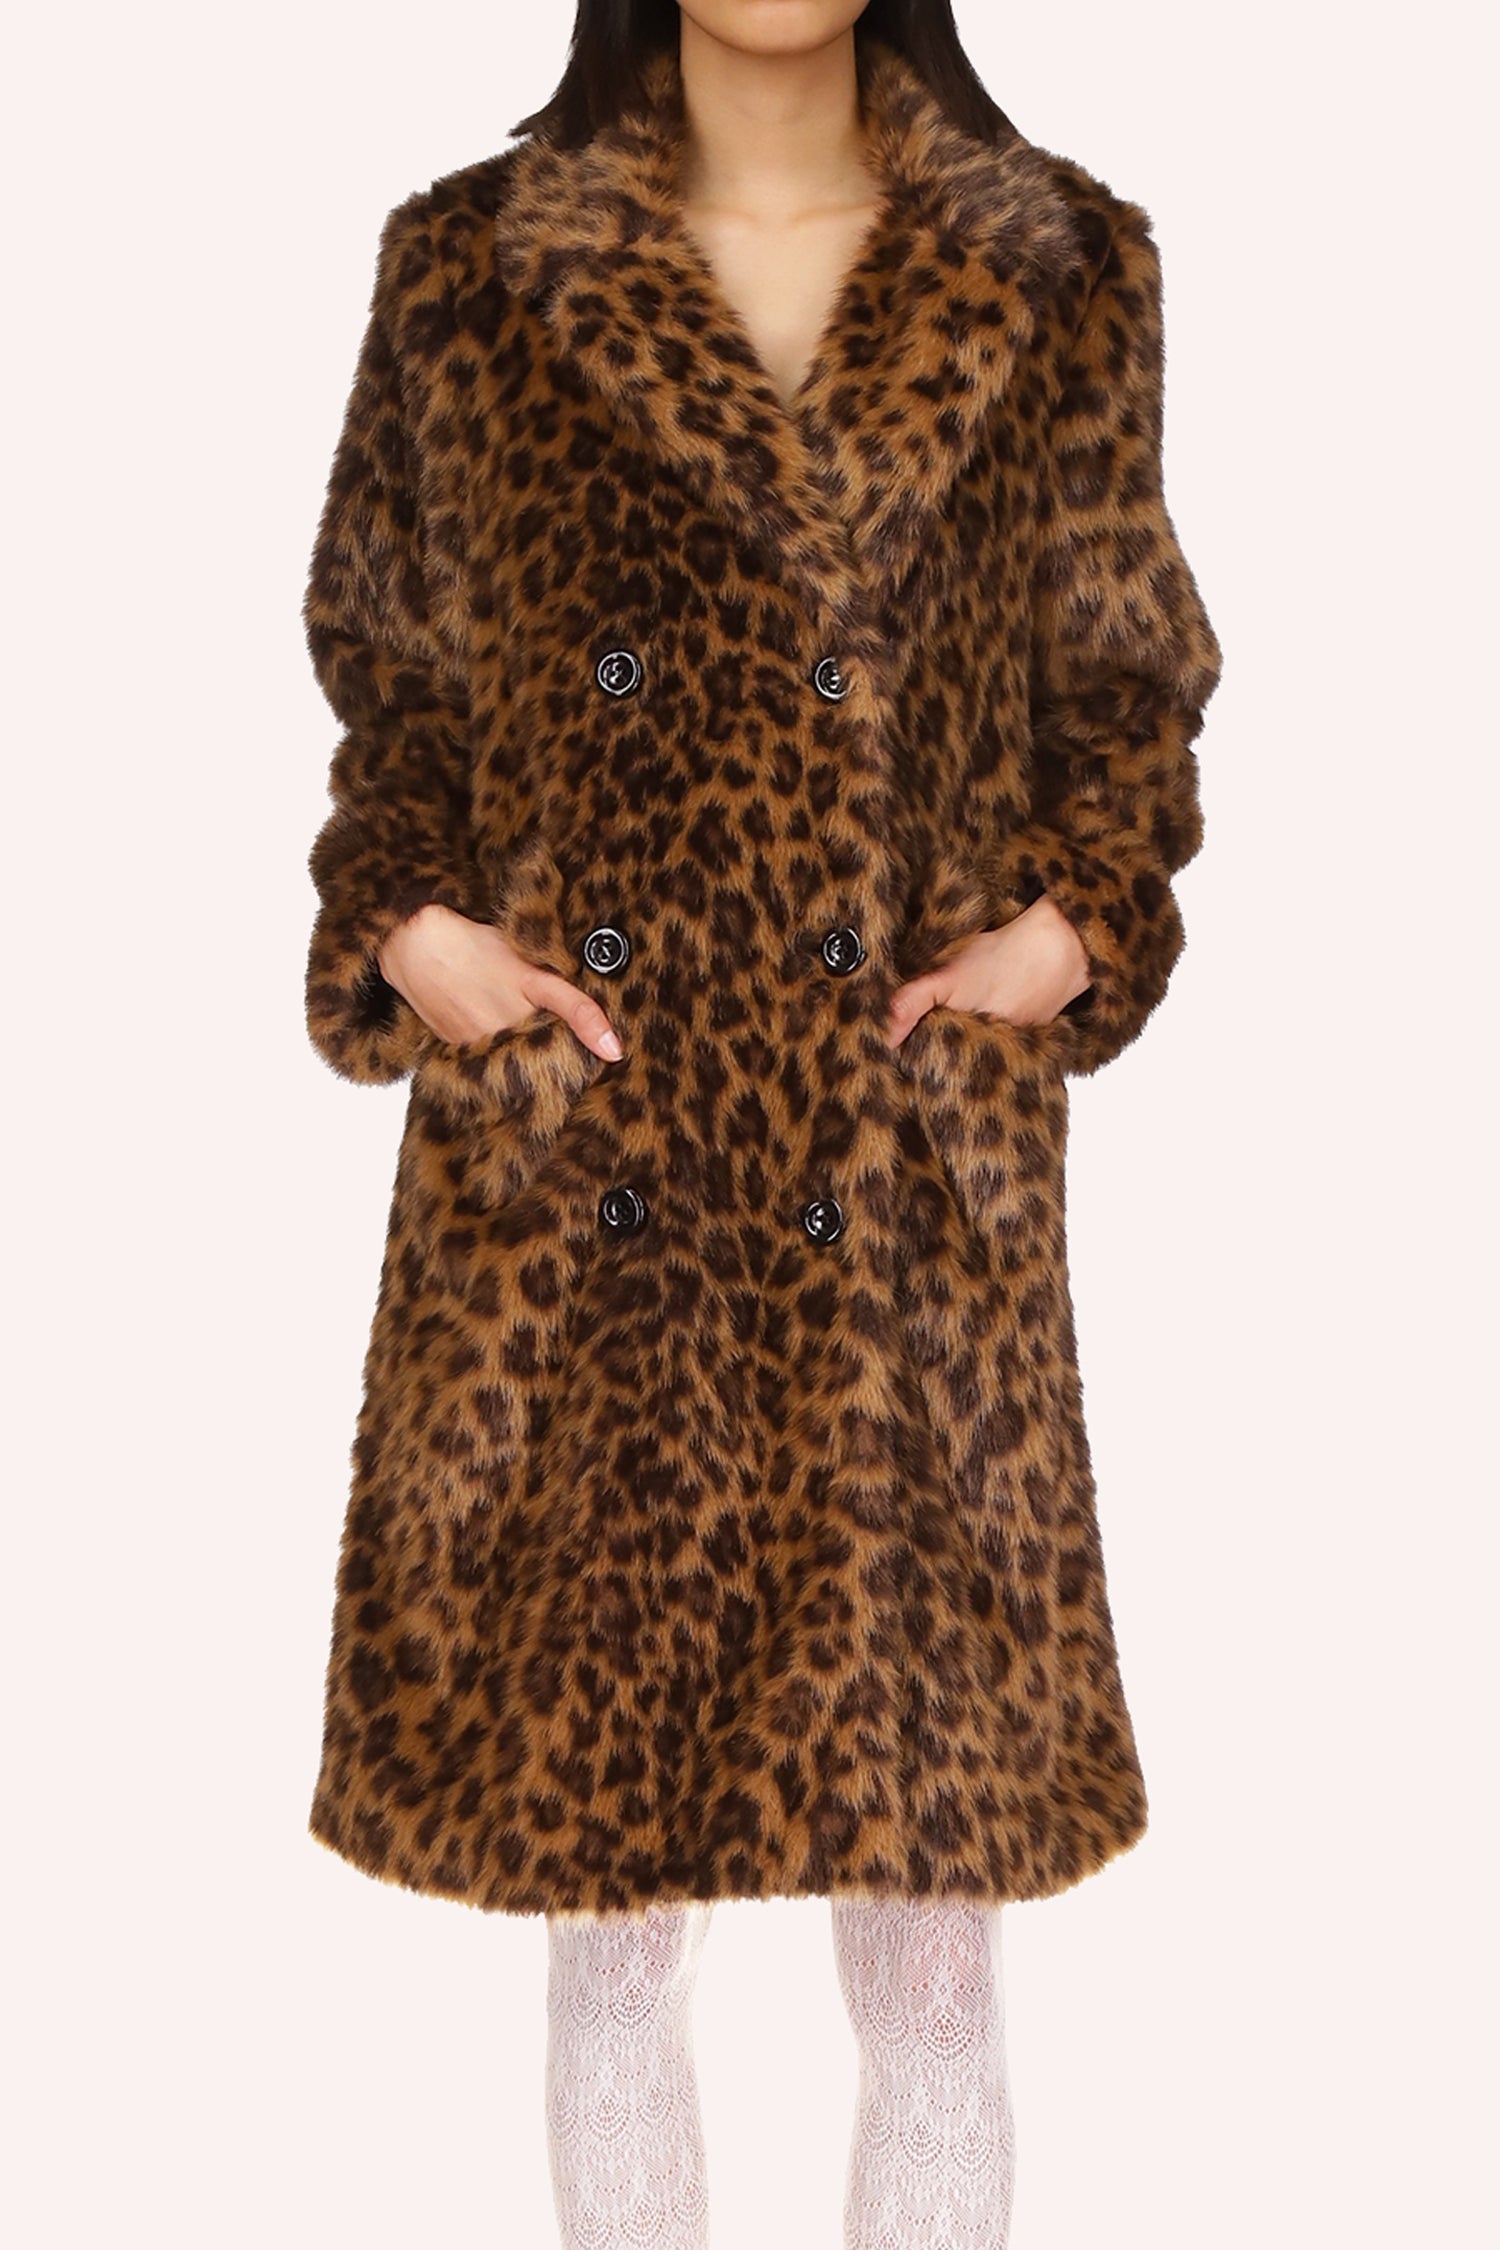 Leopard coat, double-breasted with long sleeves, V-collar, and 2 flapped pockets, 3 rows of 2 buttons